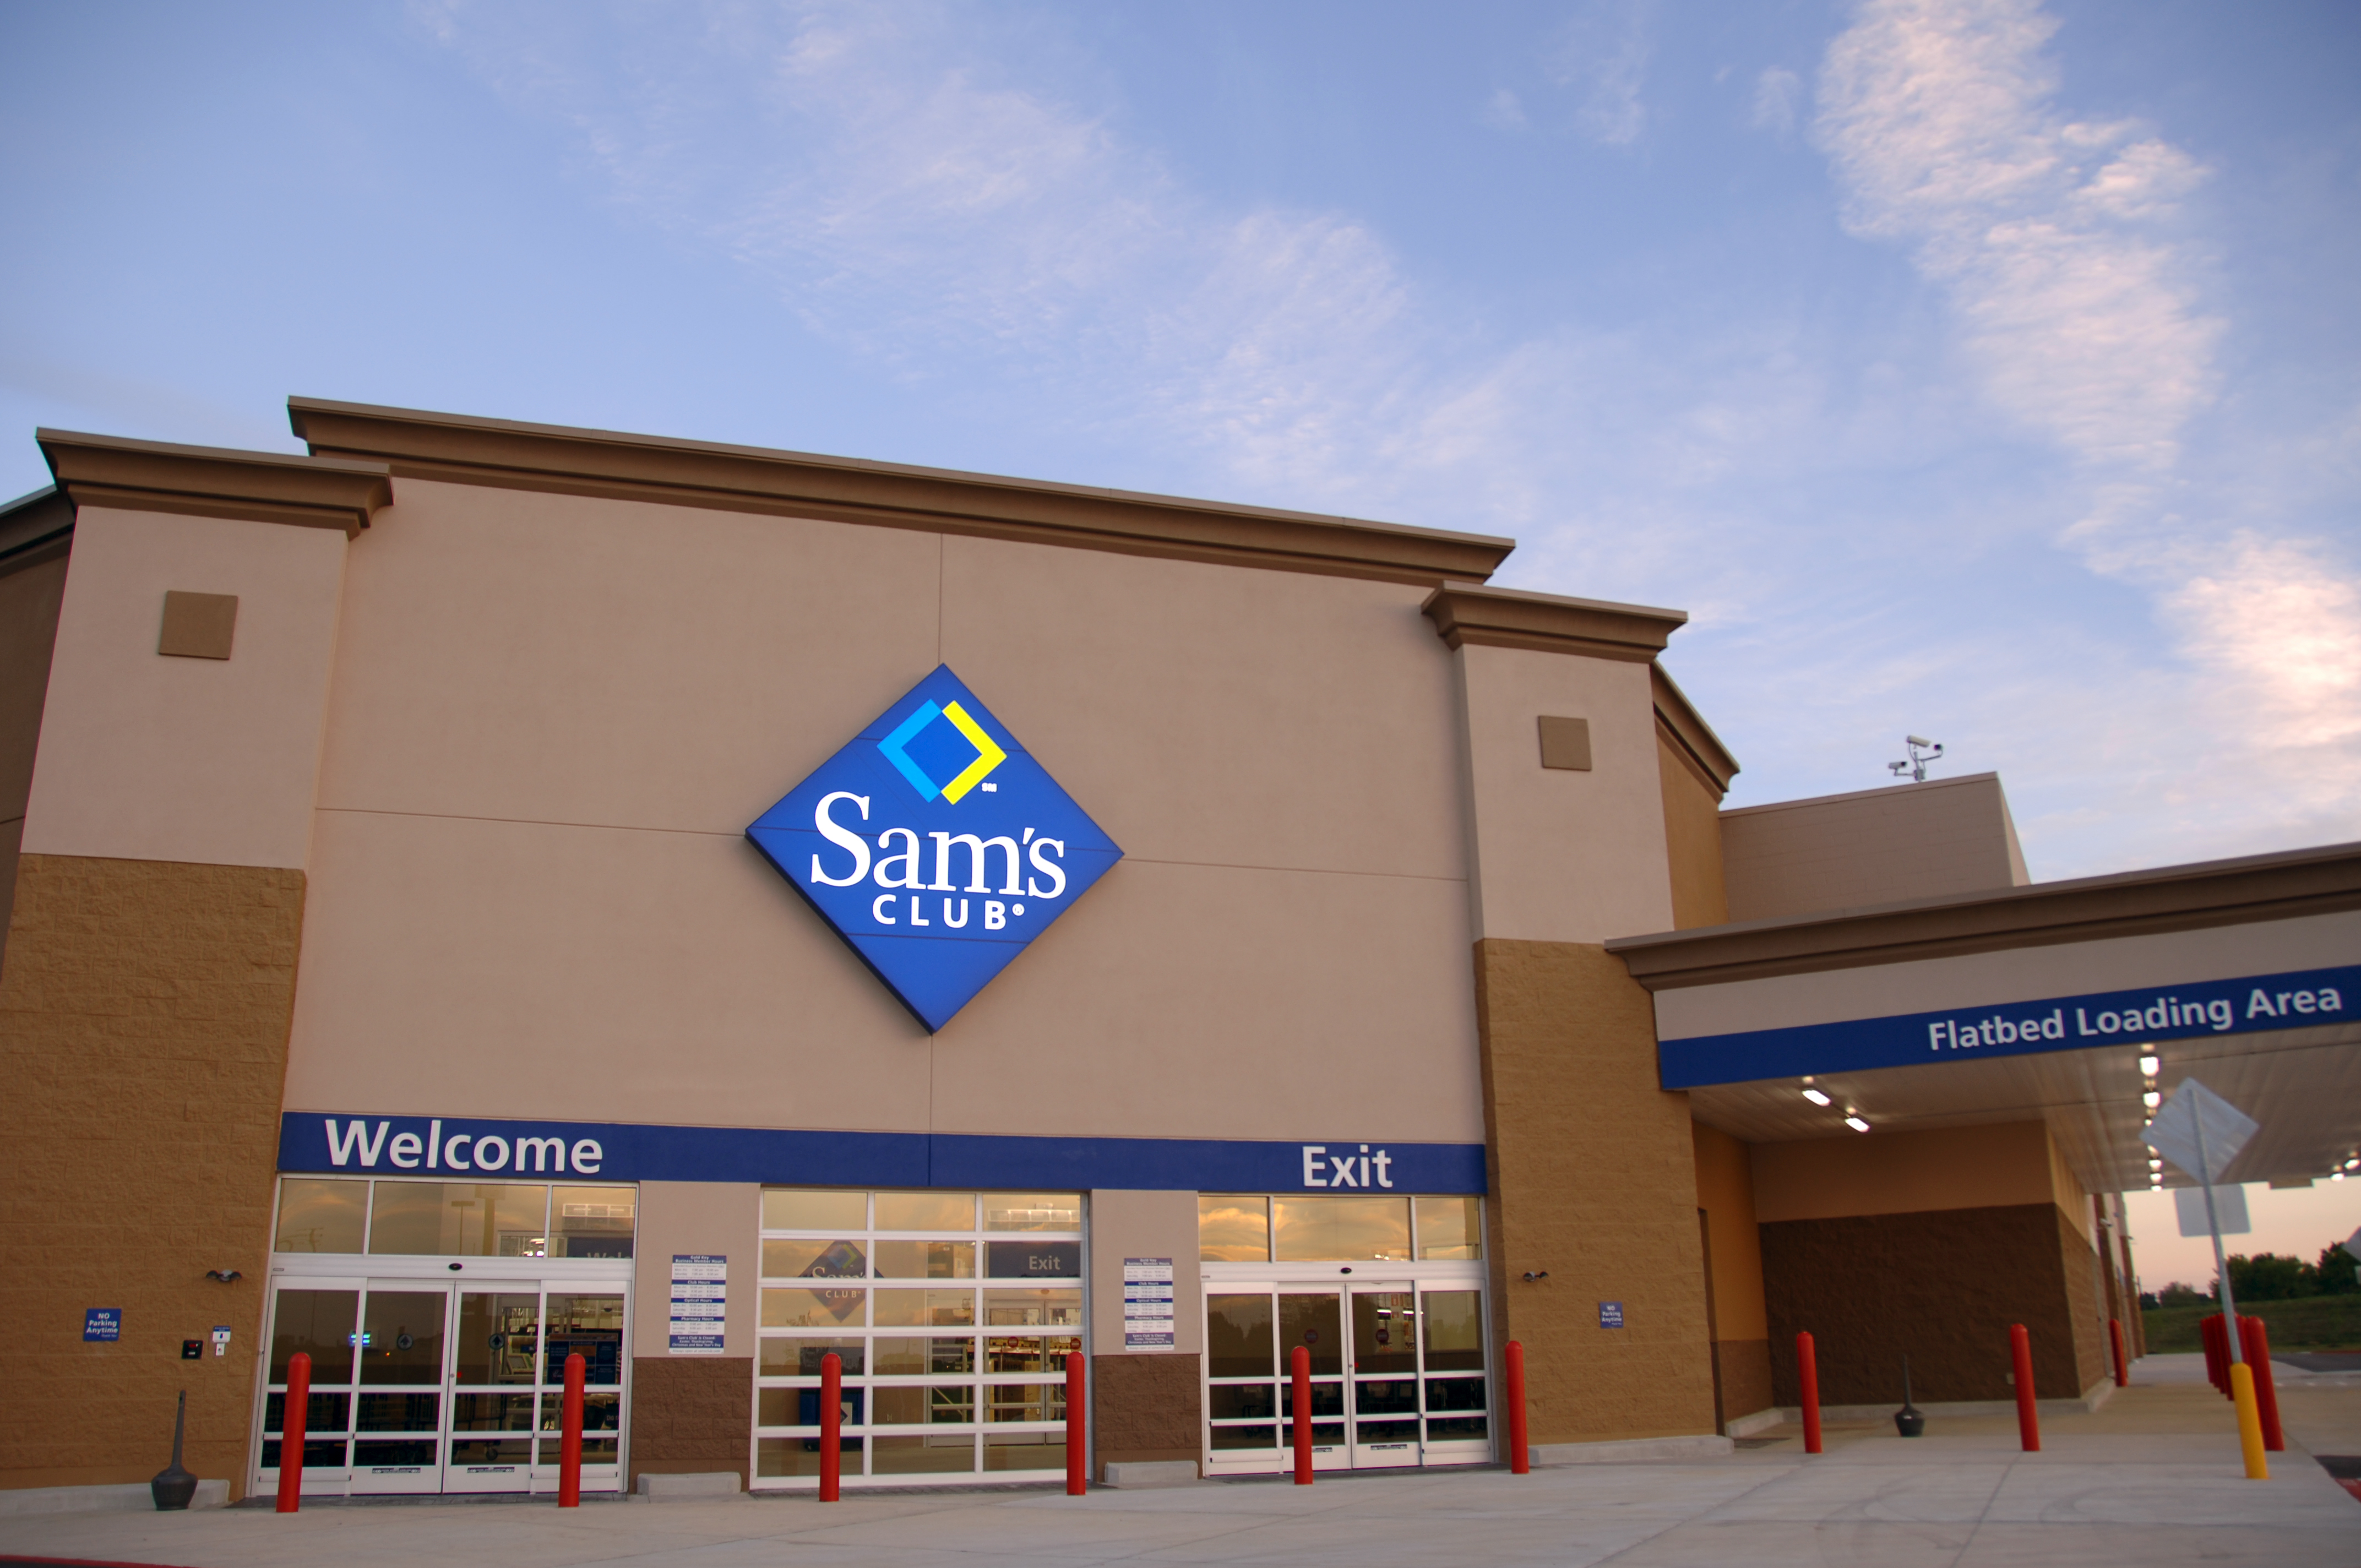 what time does sam's club open for seniors?